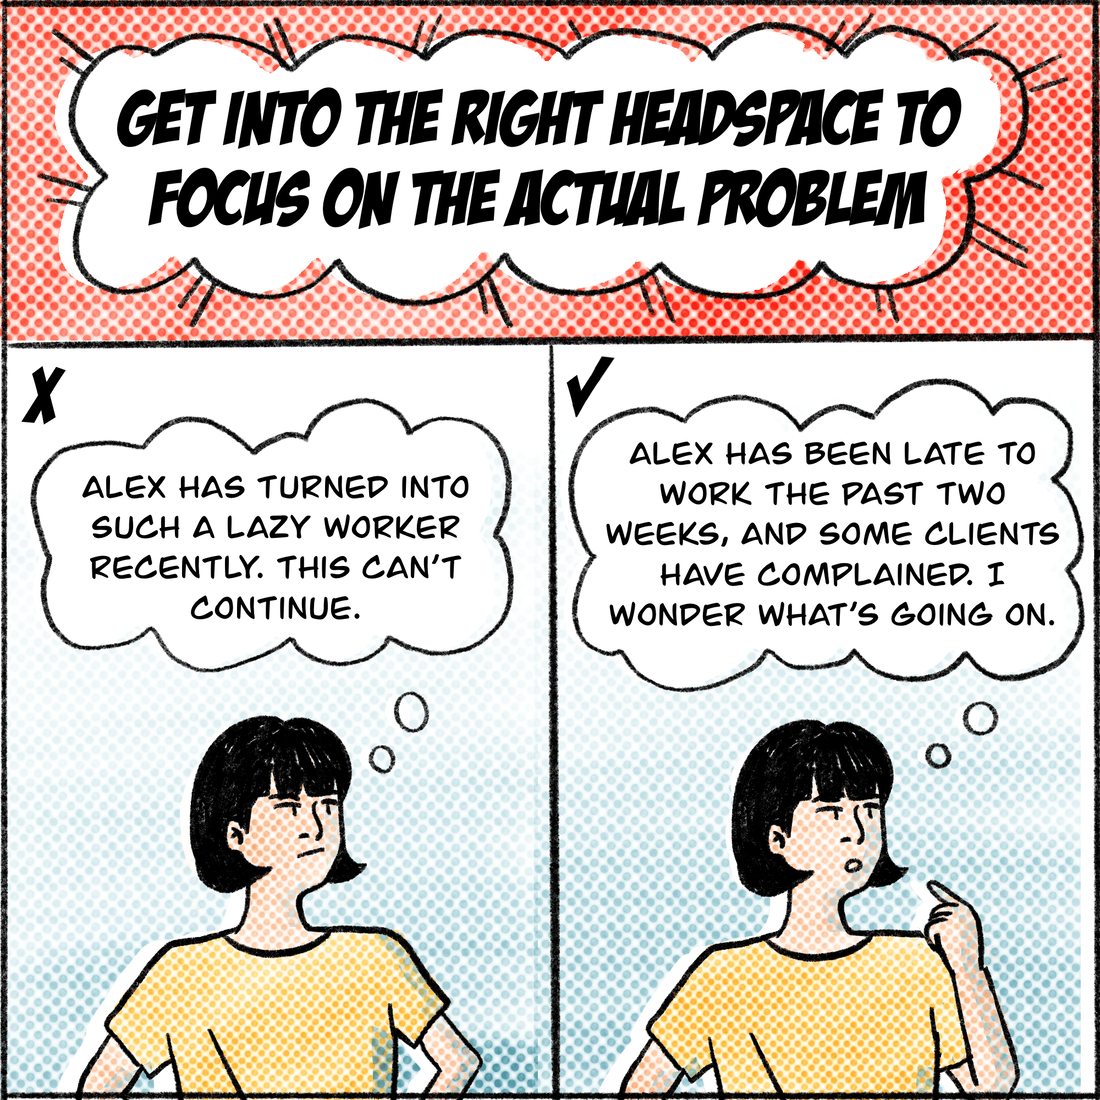 Get into the right headspace to focus on the actual problem. What not to do: "Alex has turned into such a lazy worker recently. This can't continue," Jo thinks. A more helpful way to frame the issue: "Alex has been late to work the past two weeks, and some clients have complained. I wonder what's going on?" 